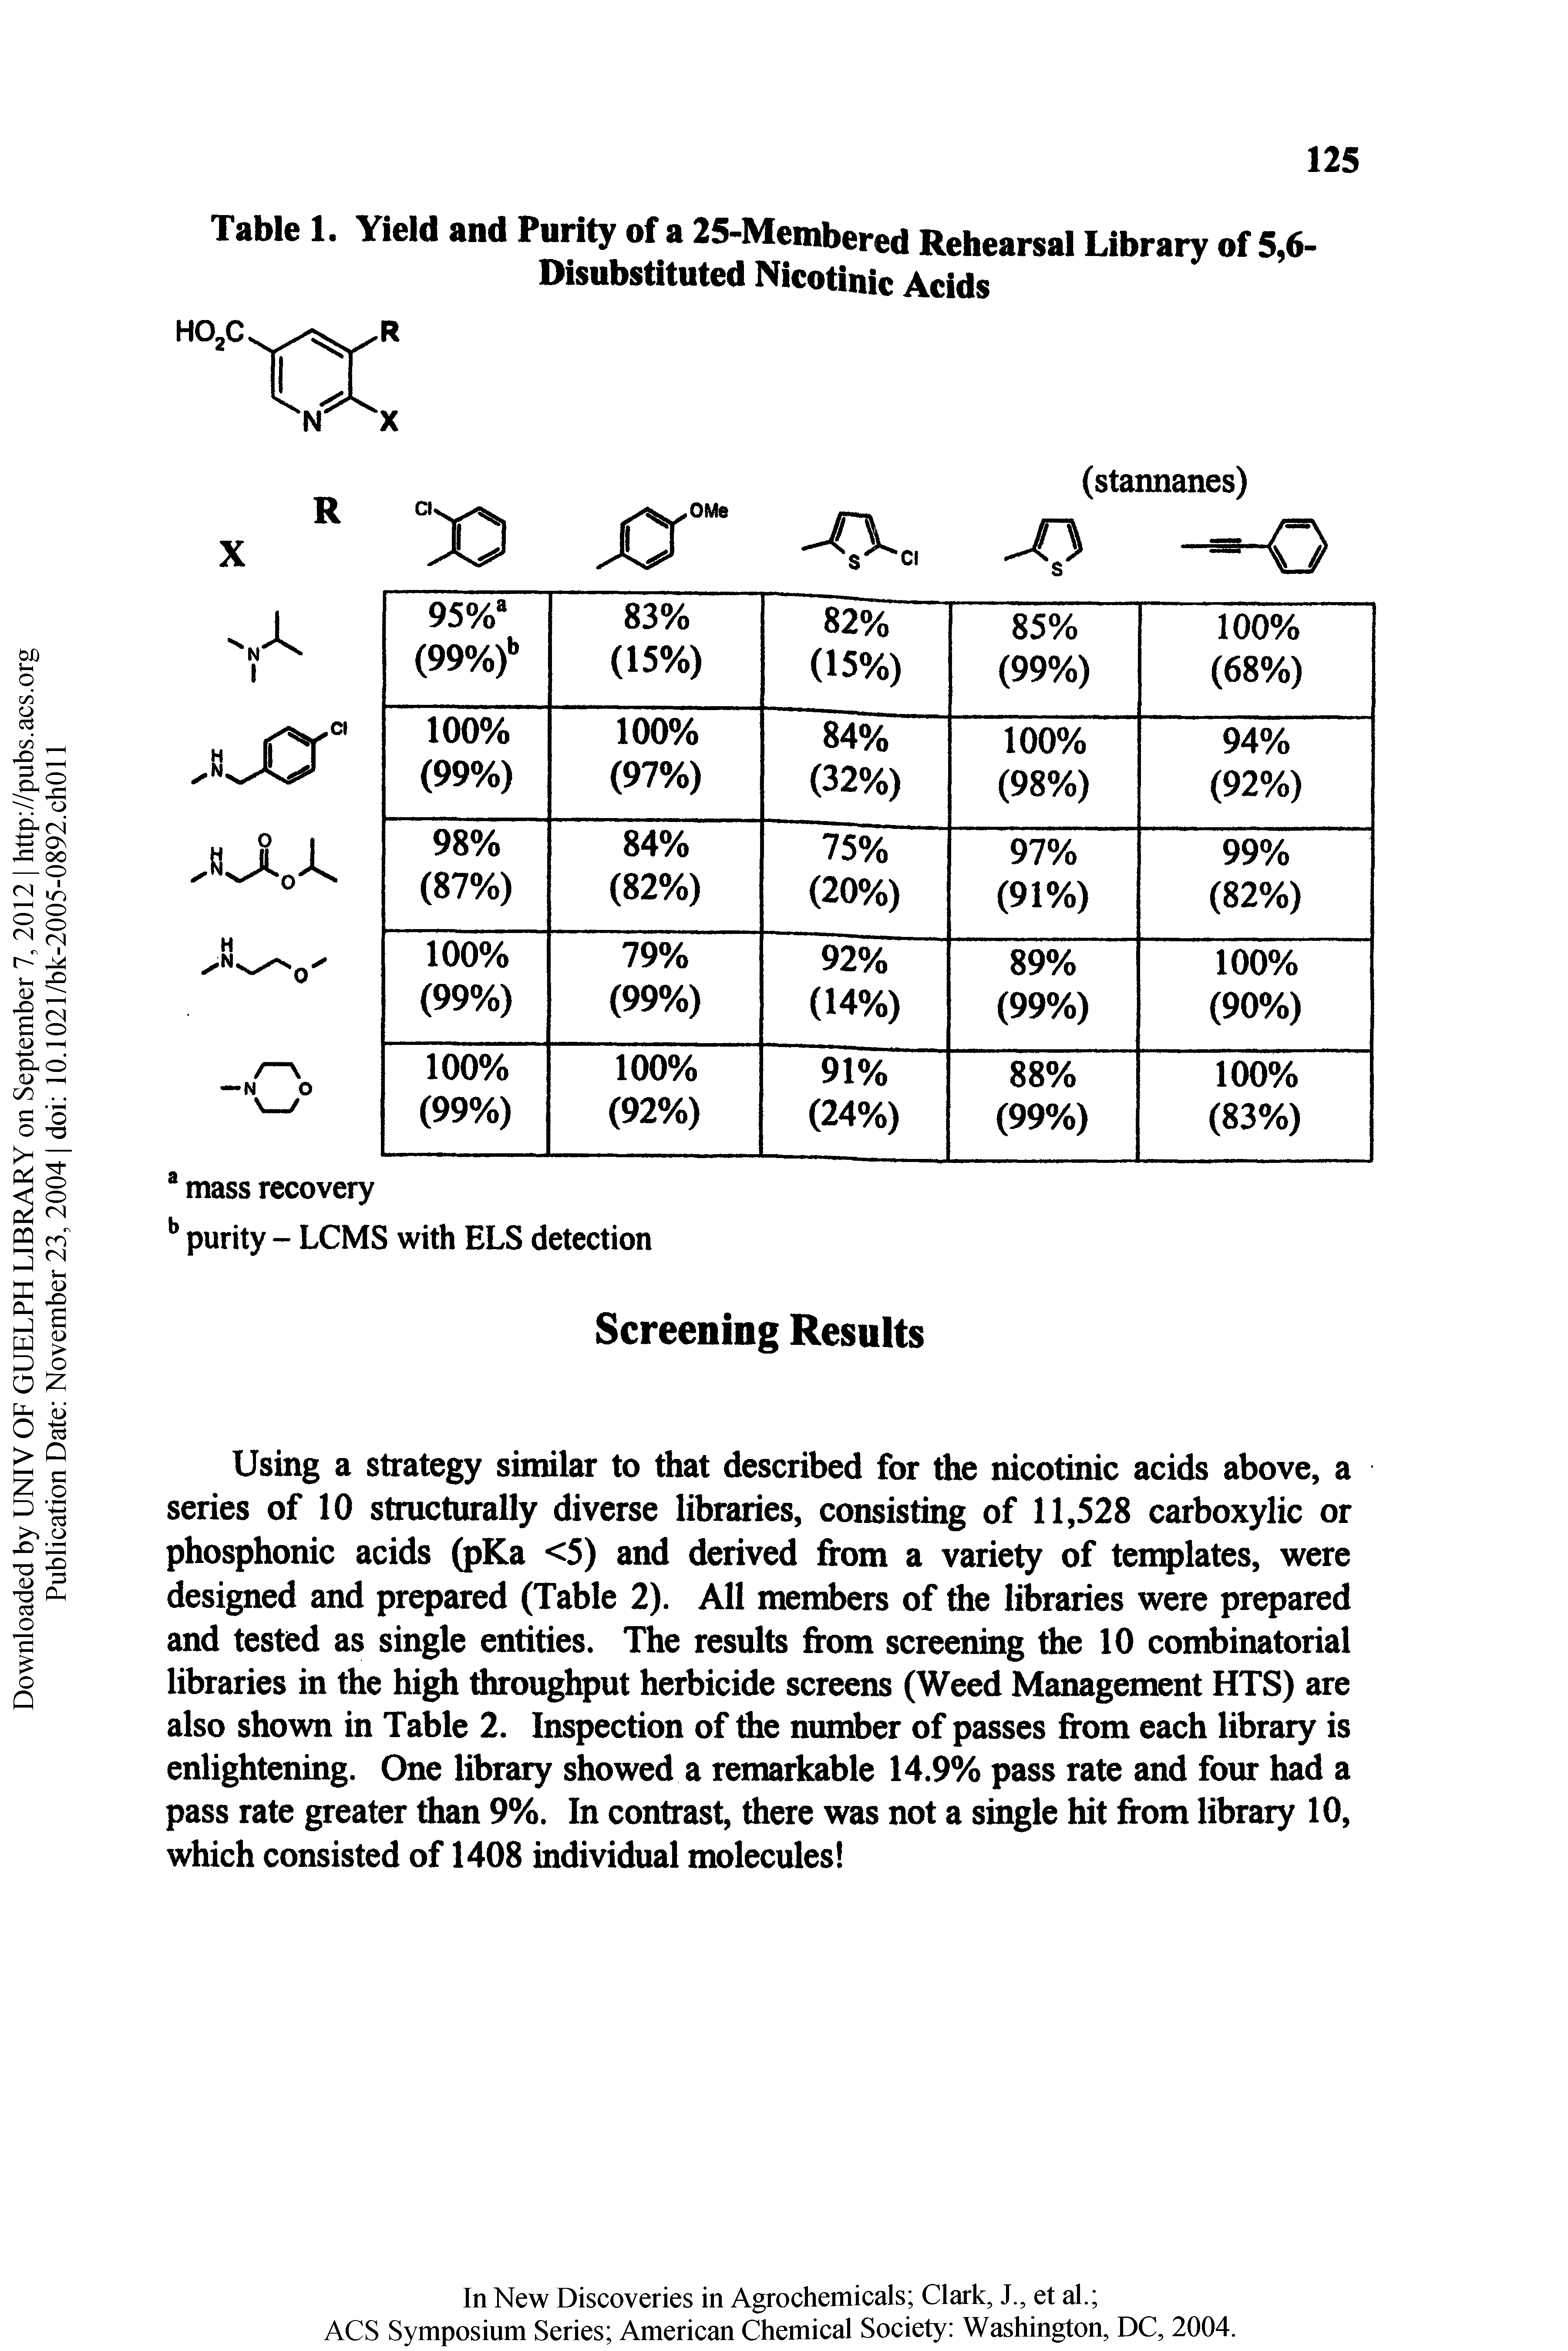 Table 1. Yield and Purity of a 25-Membered Rehearsal Library of 5,6-Disubstituted Nicotinic Acids...